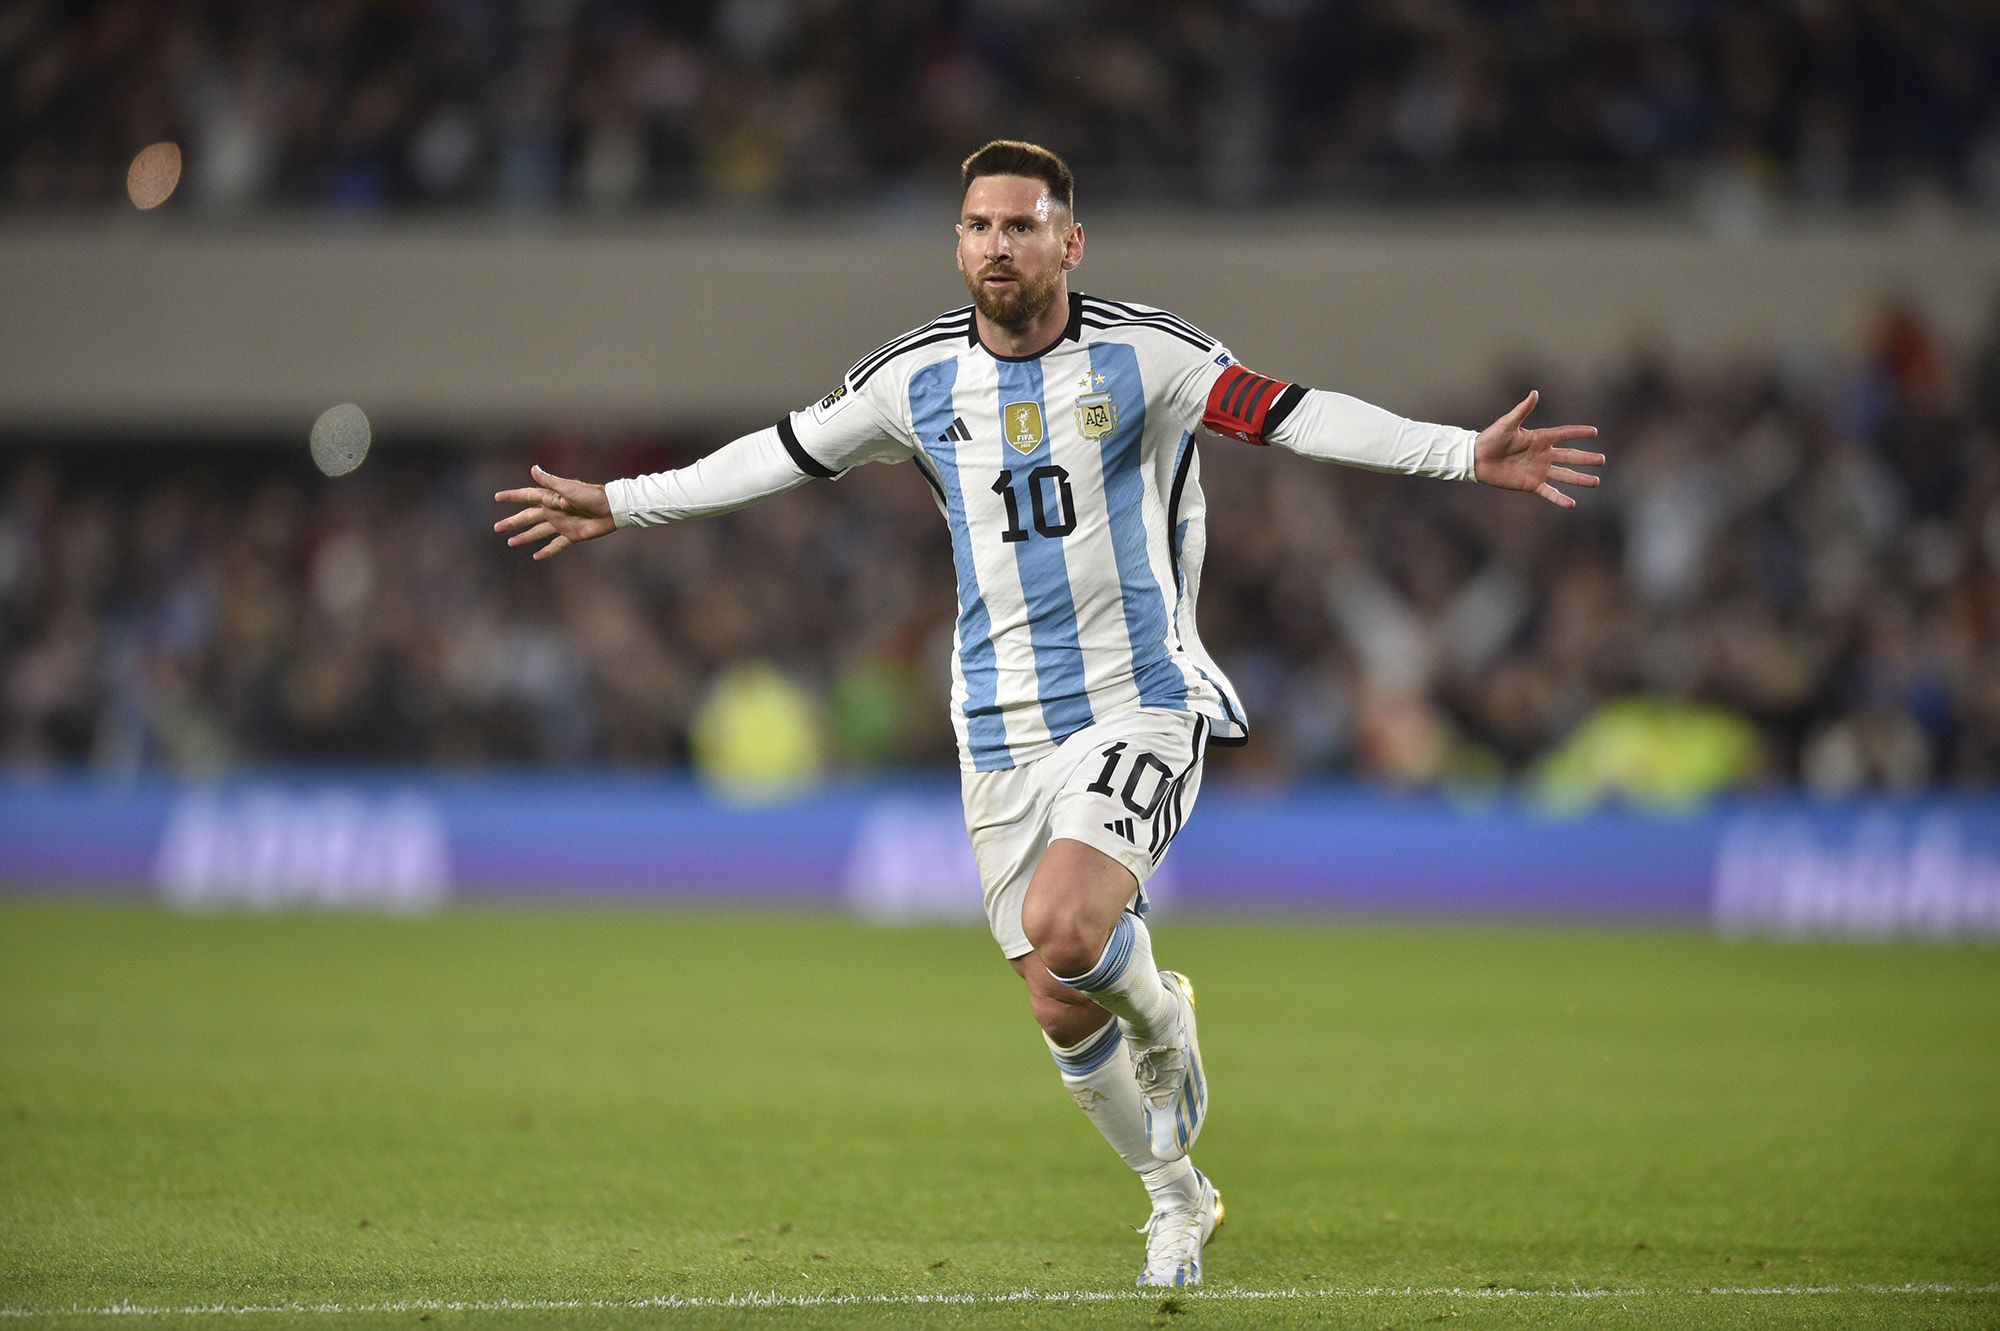 Lionel Messi free kick leads Argentina to victory over Ecuador in